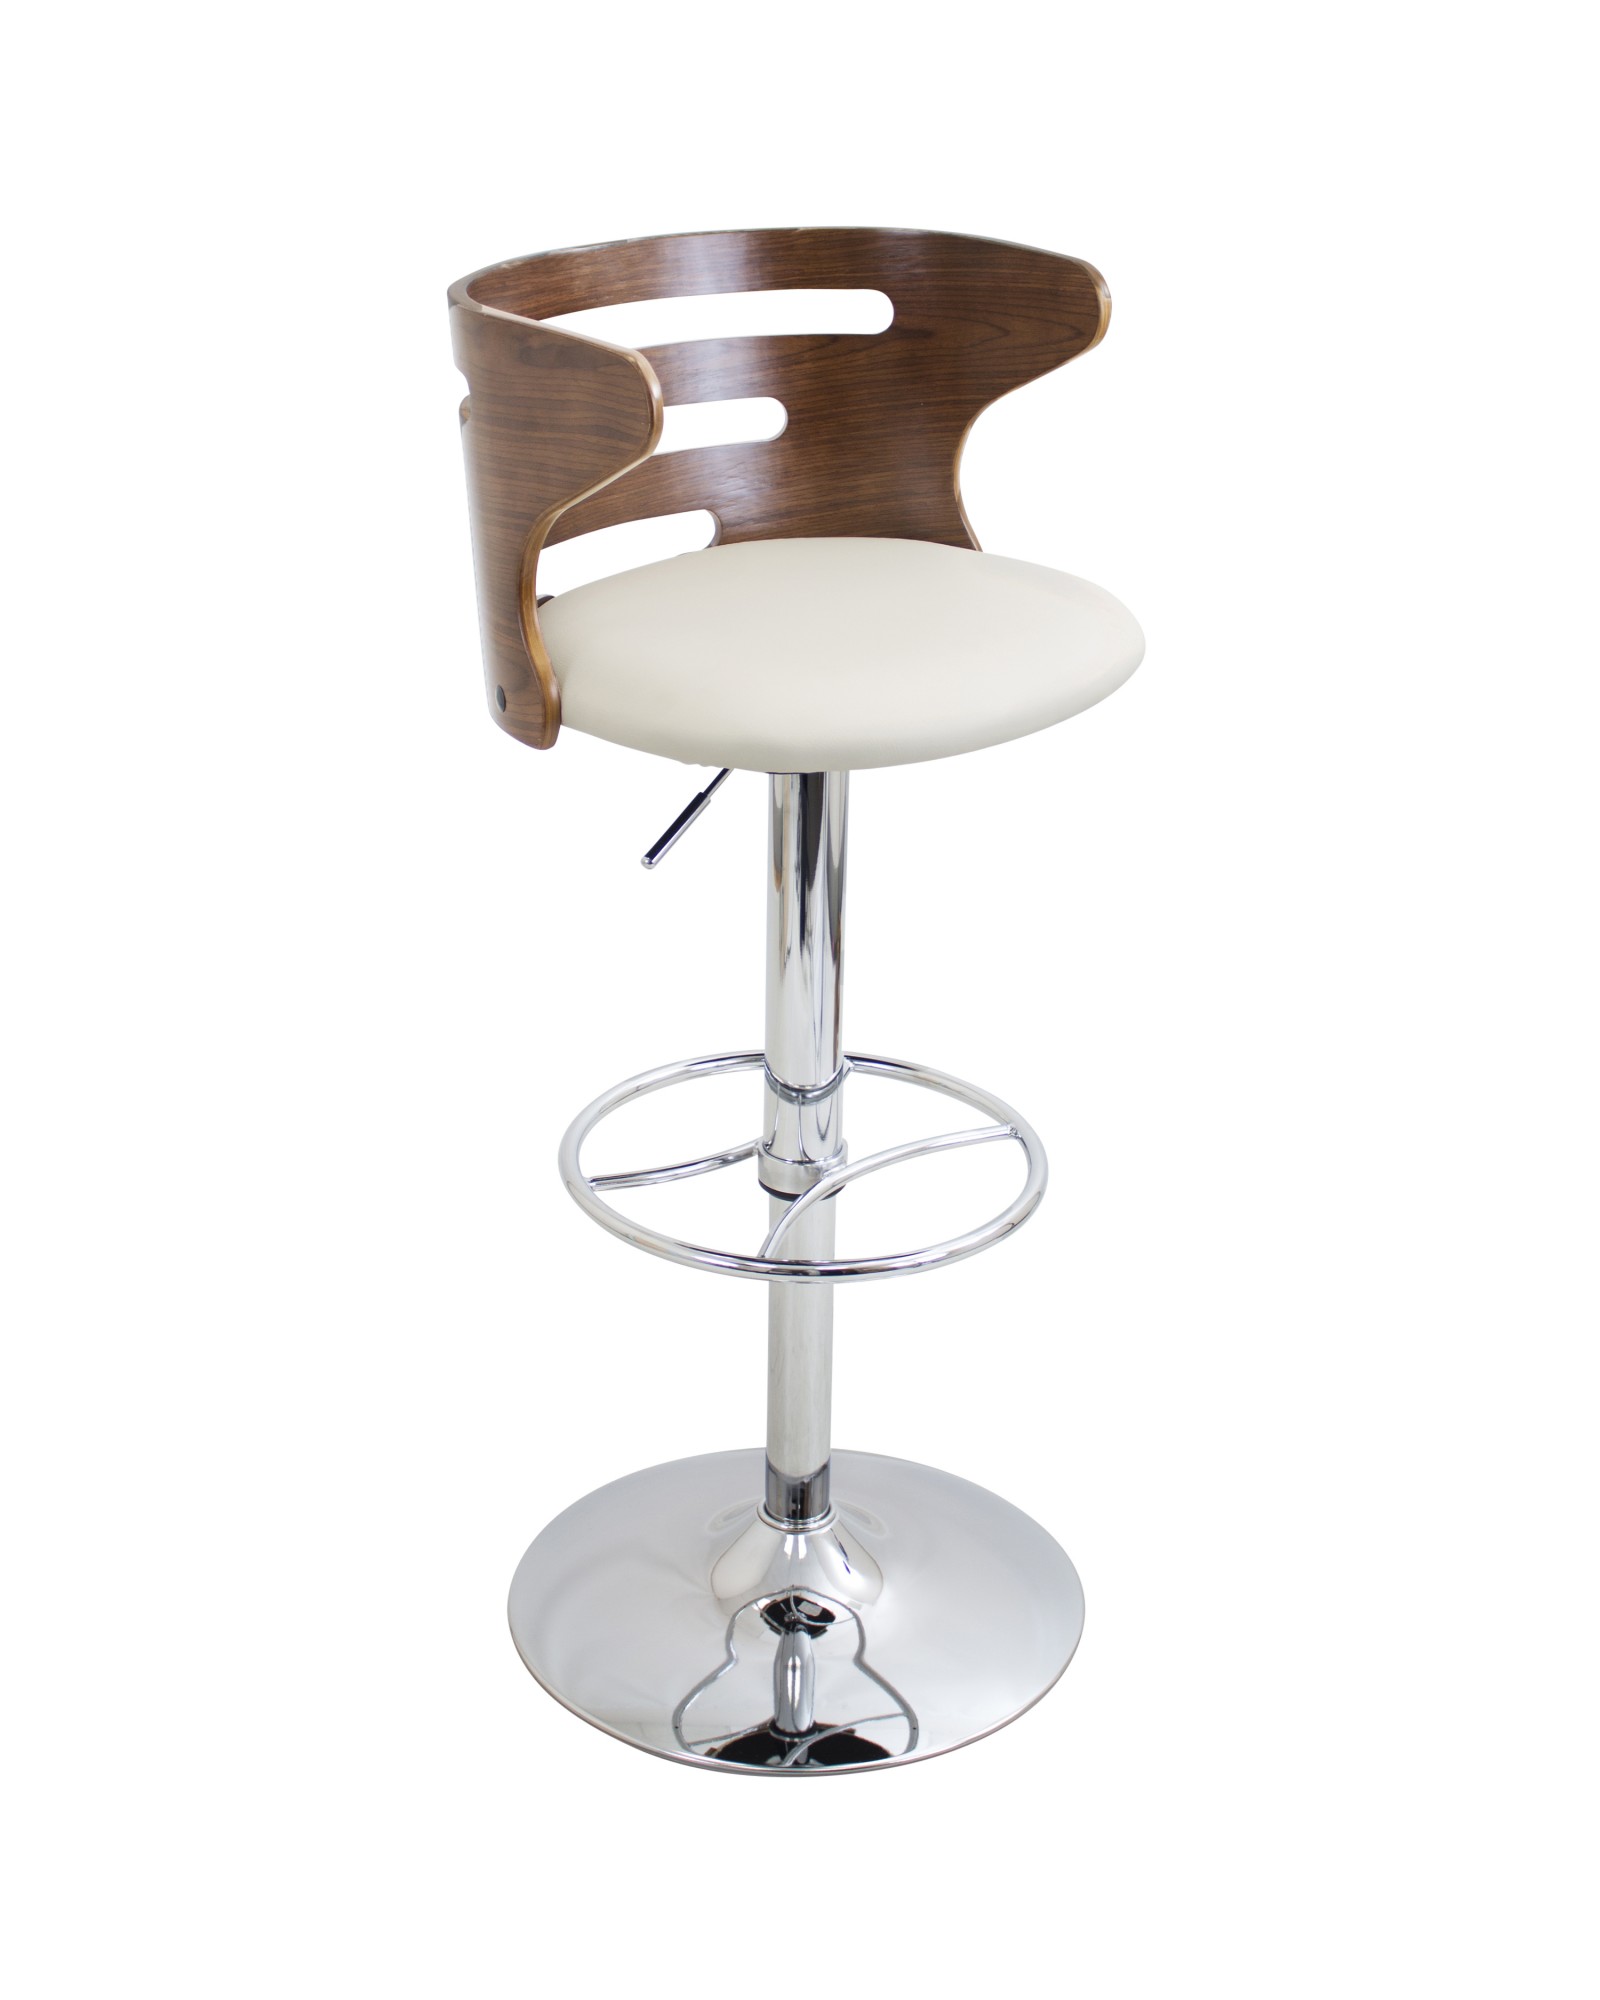 Cosi Mid-Century Modern Adjustable Barstool with Swivel in Walnut and Cream Faux Leather